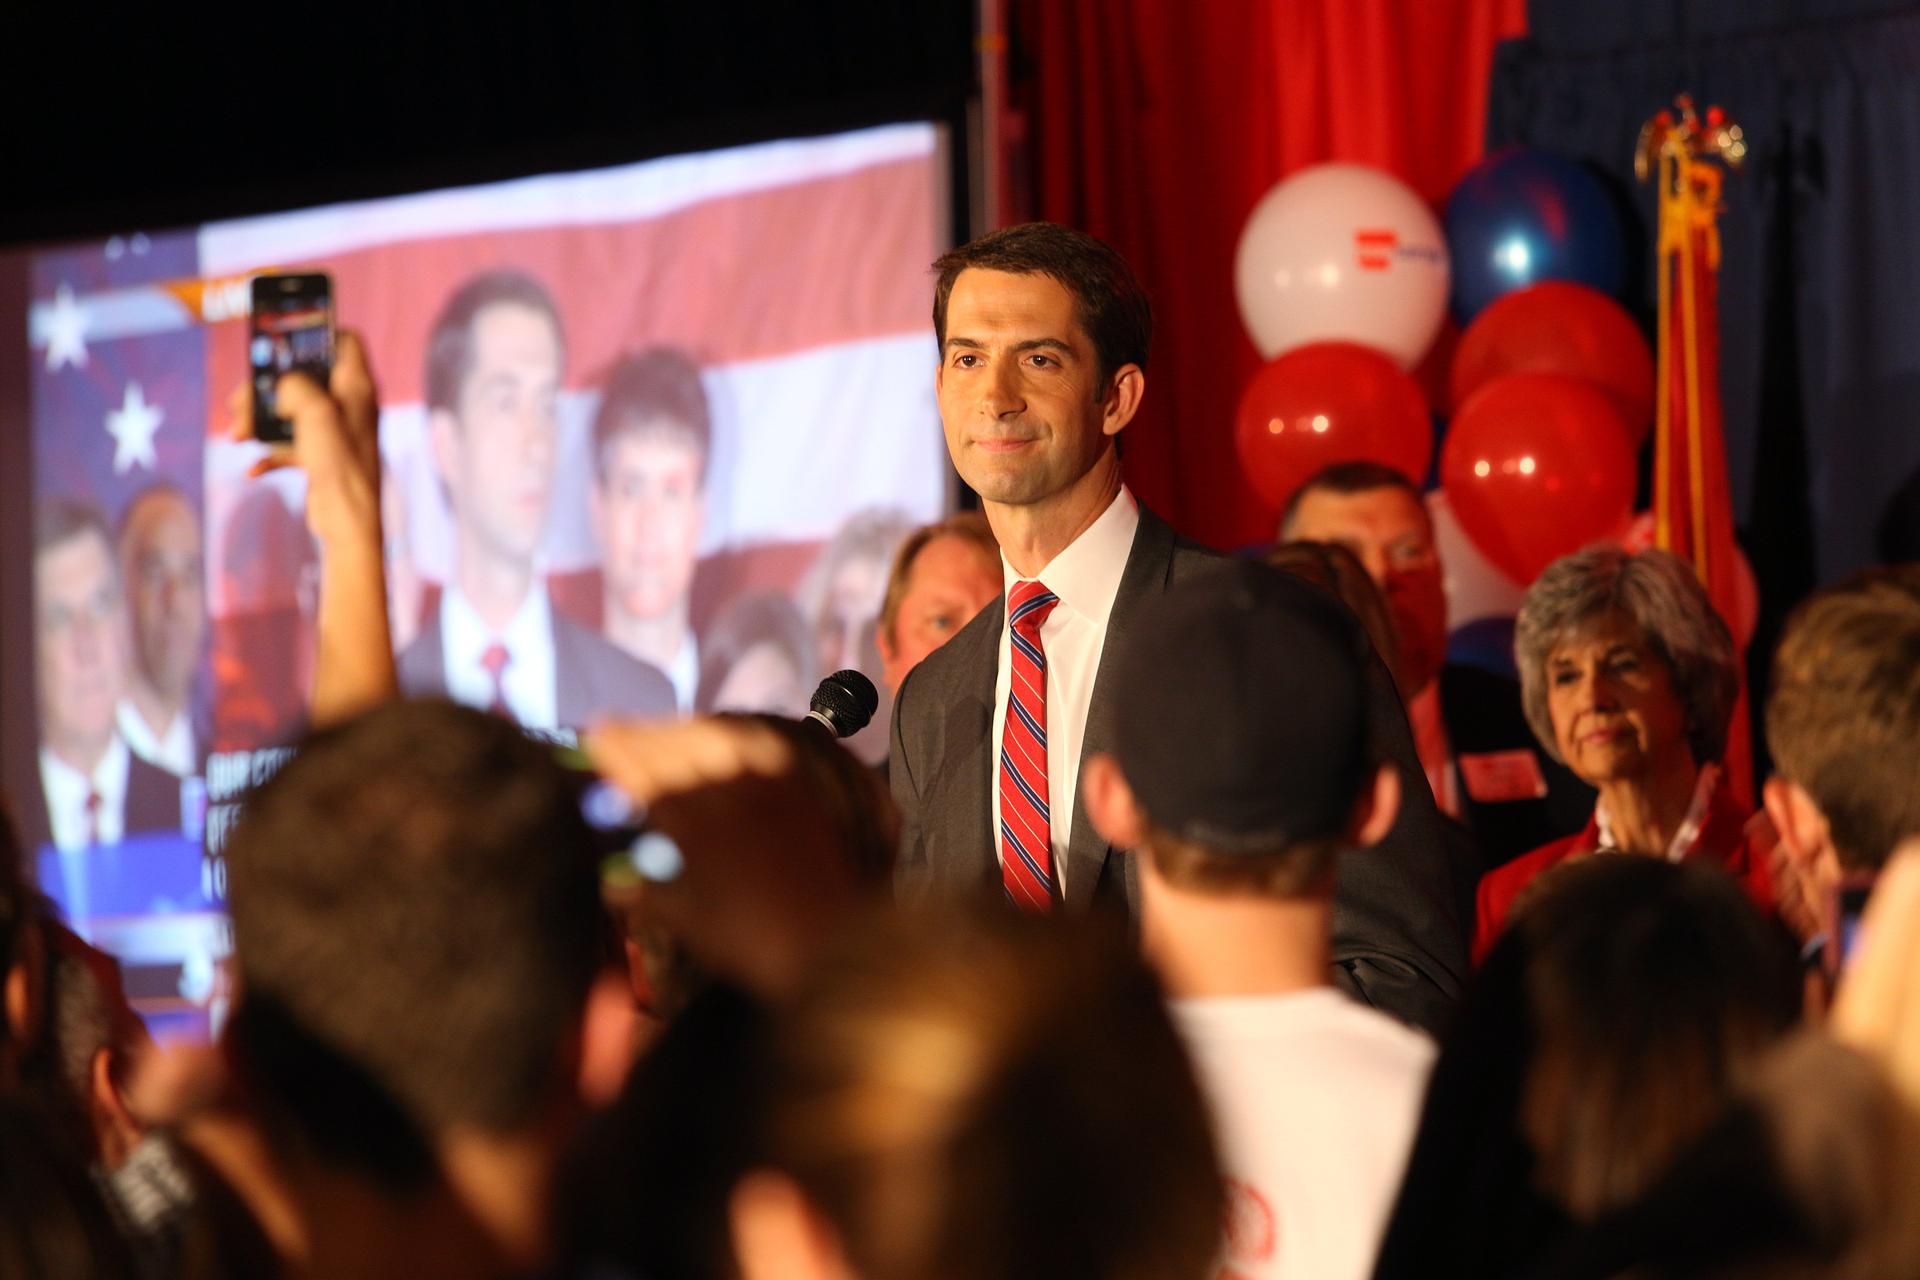 Republican Senator Tom Cotton speaks at his election victory party on November 4, 2014. The freshman senator from Arkansas is emerging as a vocal opponent of nuclear negotiations with Iran.